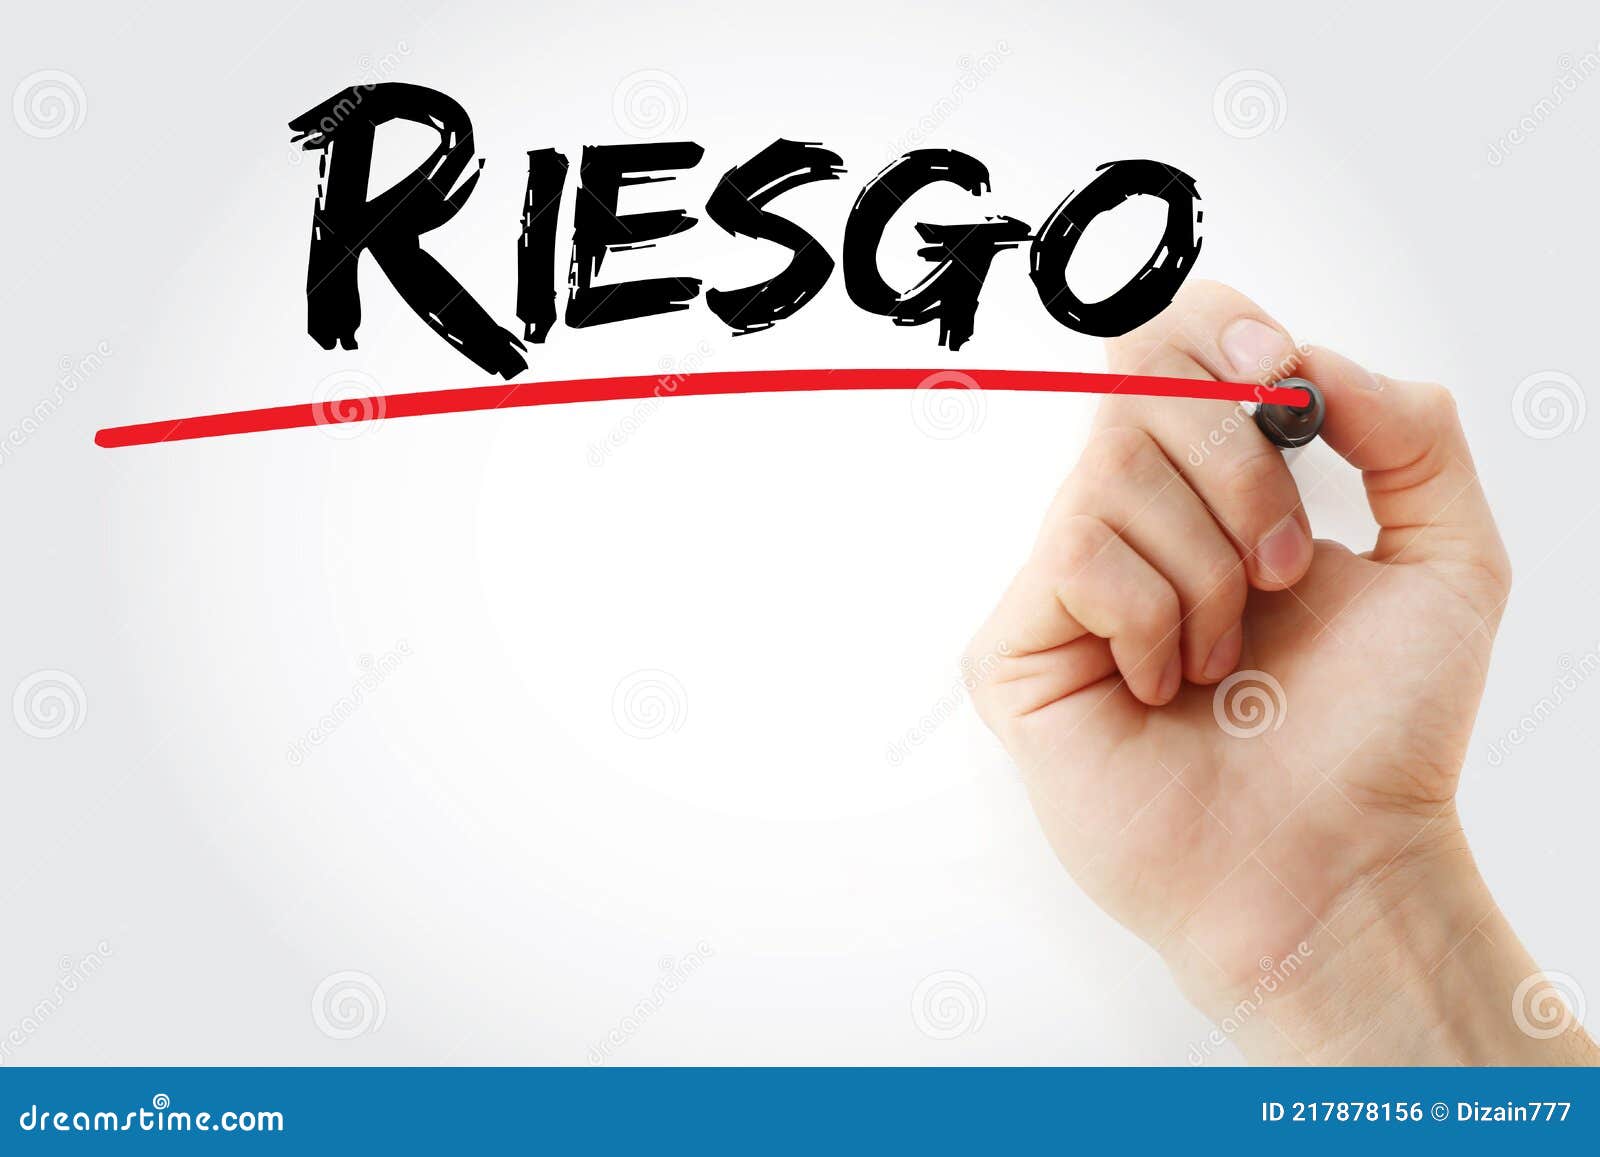 hand writing riesgo spanish words for risk with marker, business concept